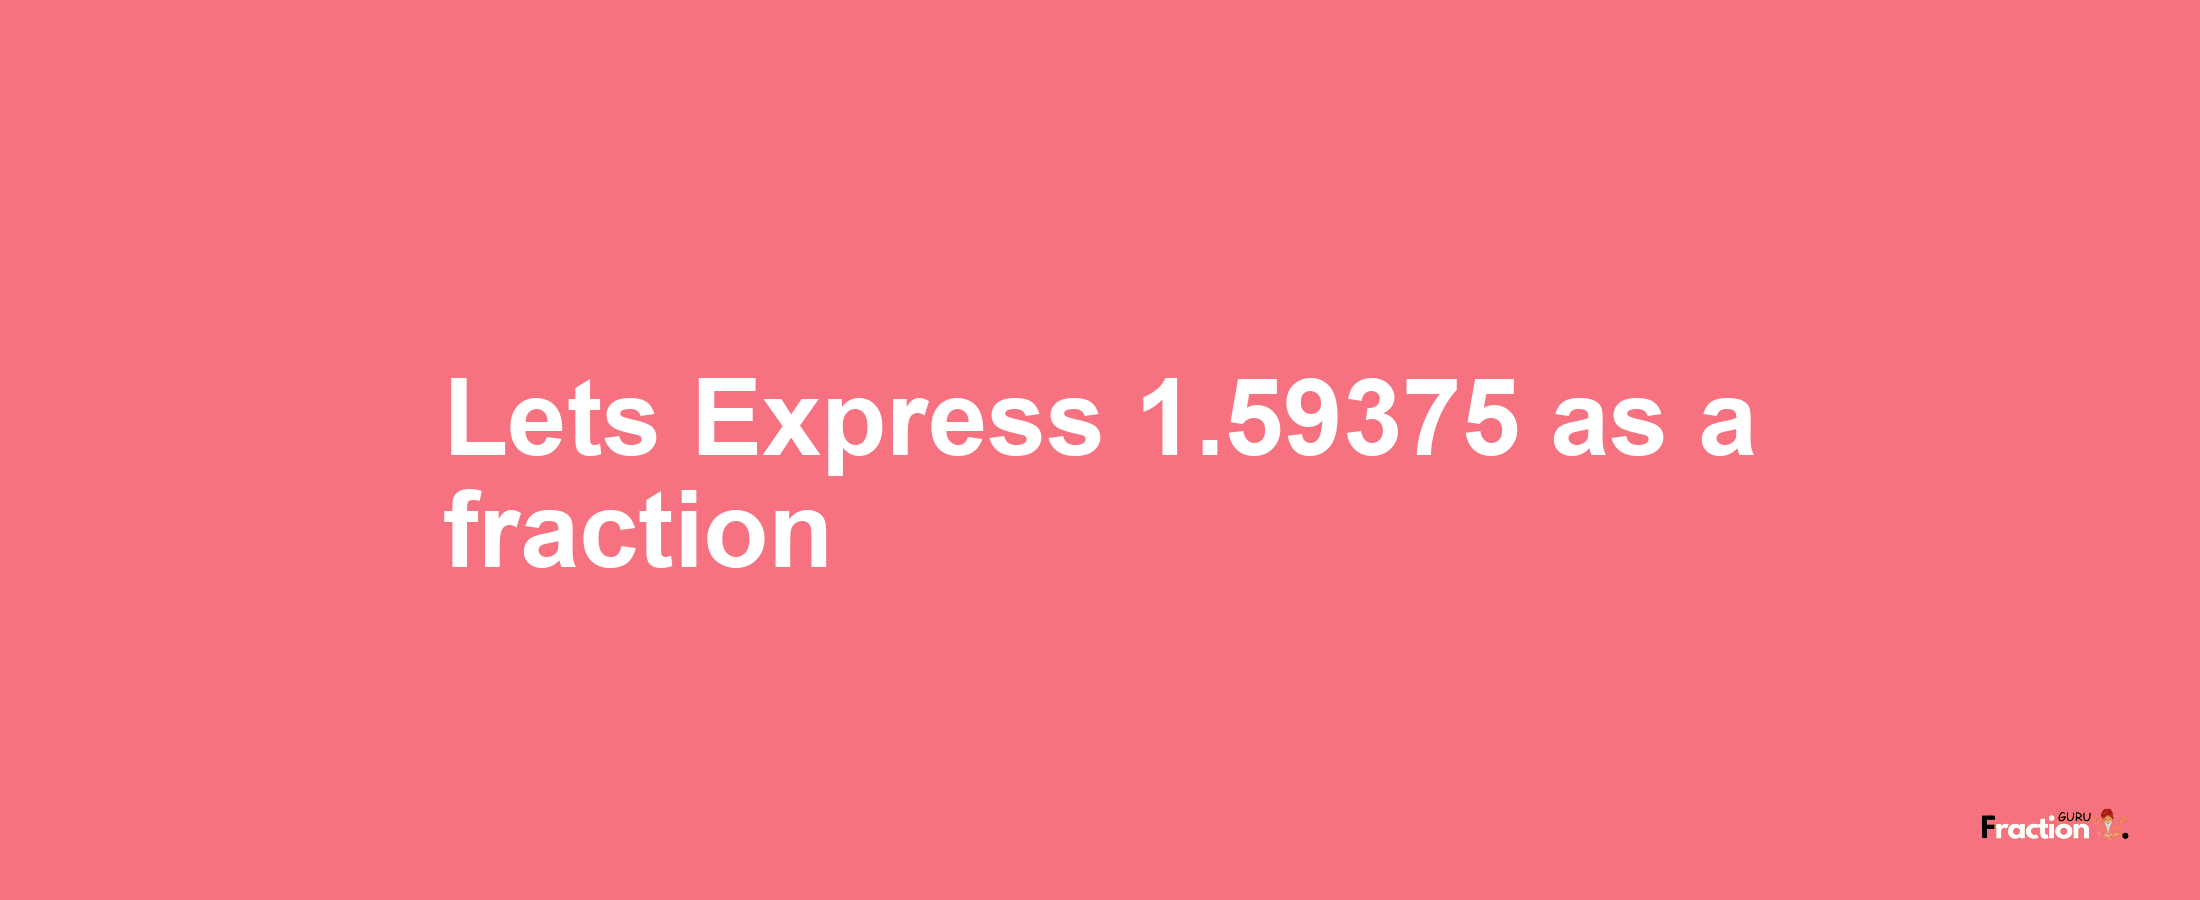 Lets Express 1.59375 as afraction